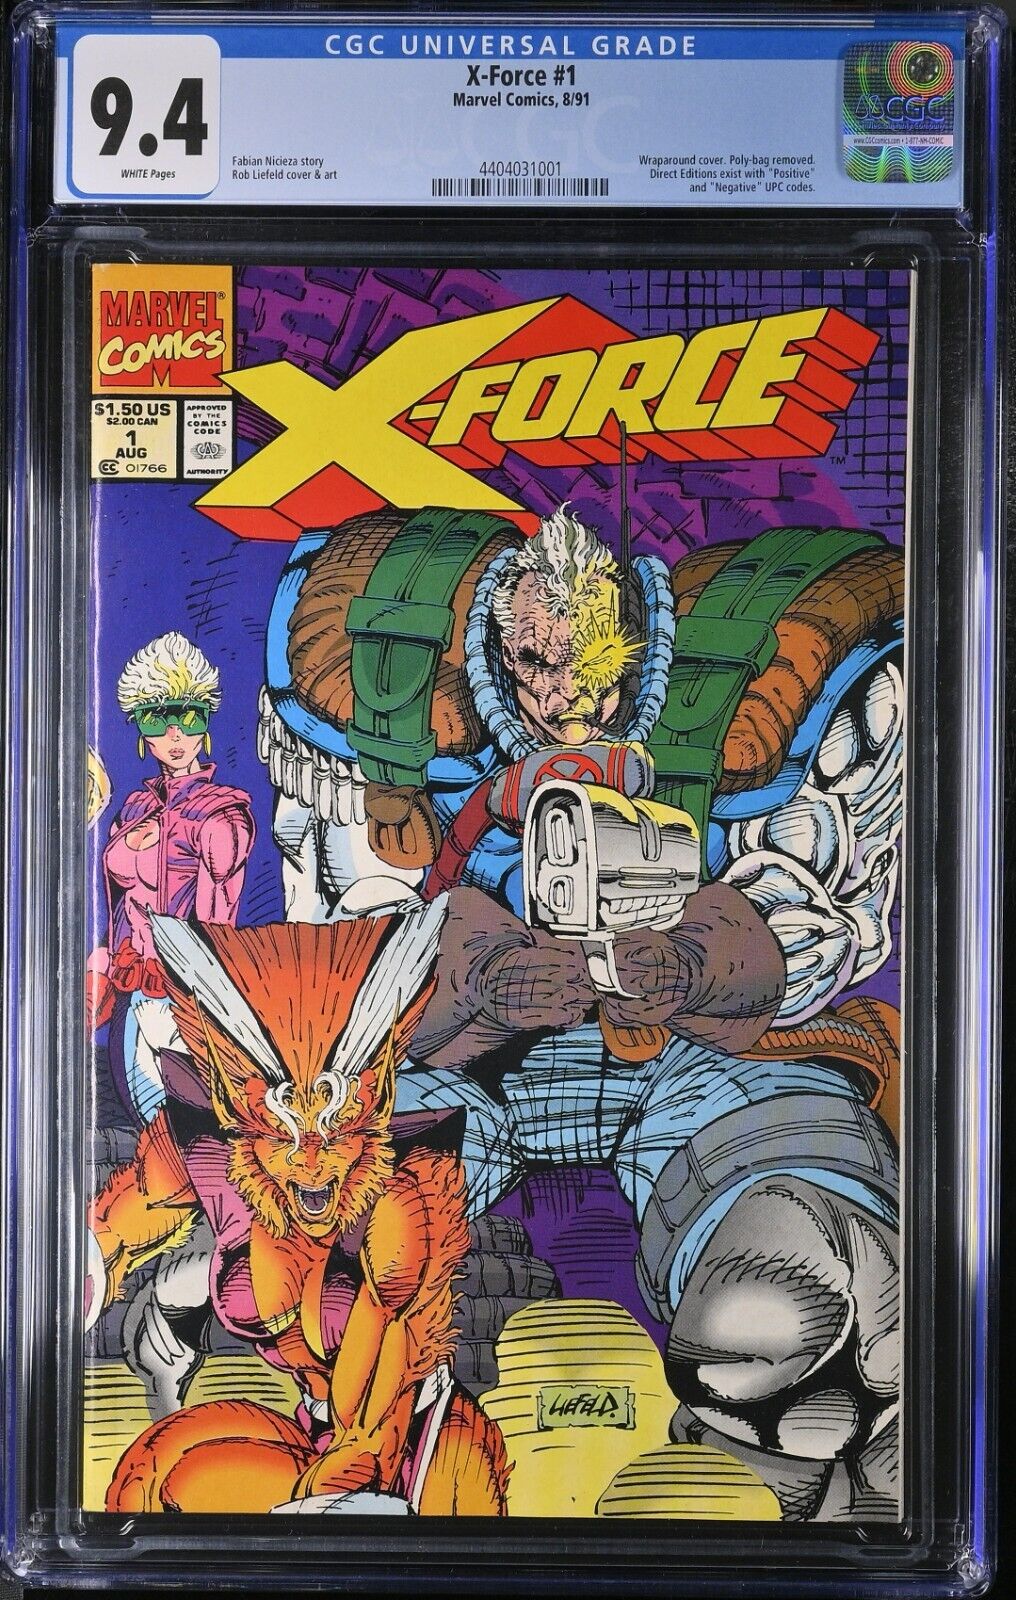 X-Force #1 CGC 9.4 💥Wraparound Cover, Negative UPC Polybag Removed 1st Issue